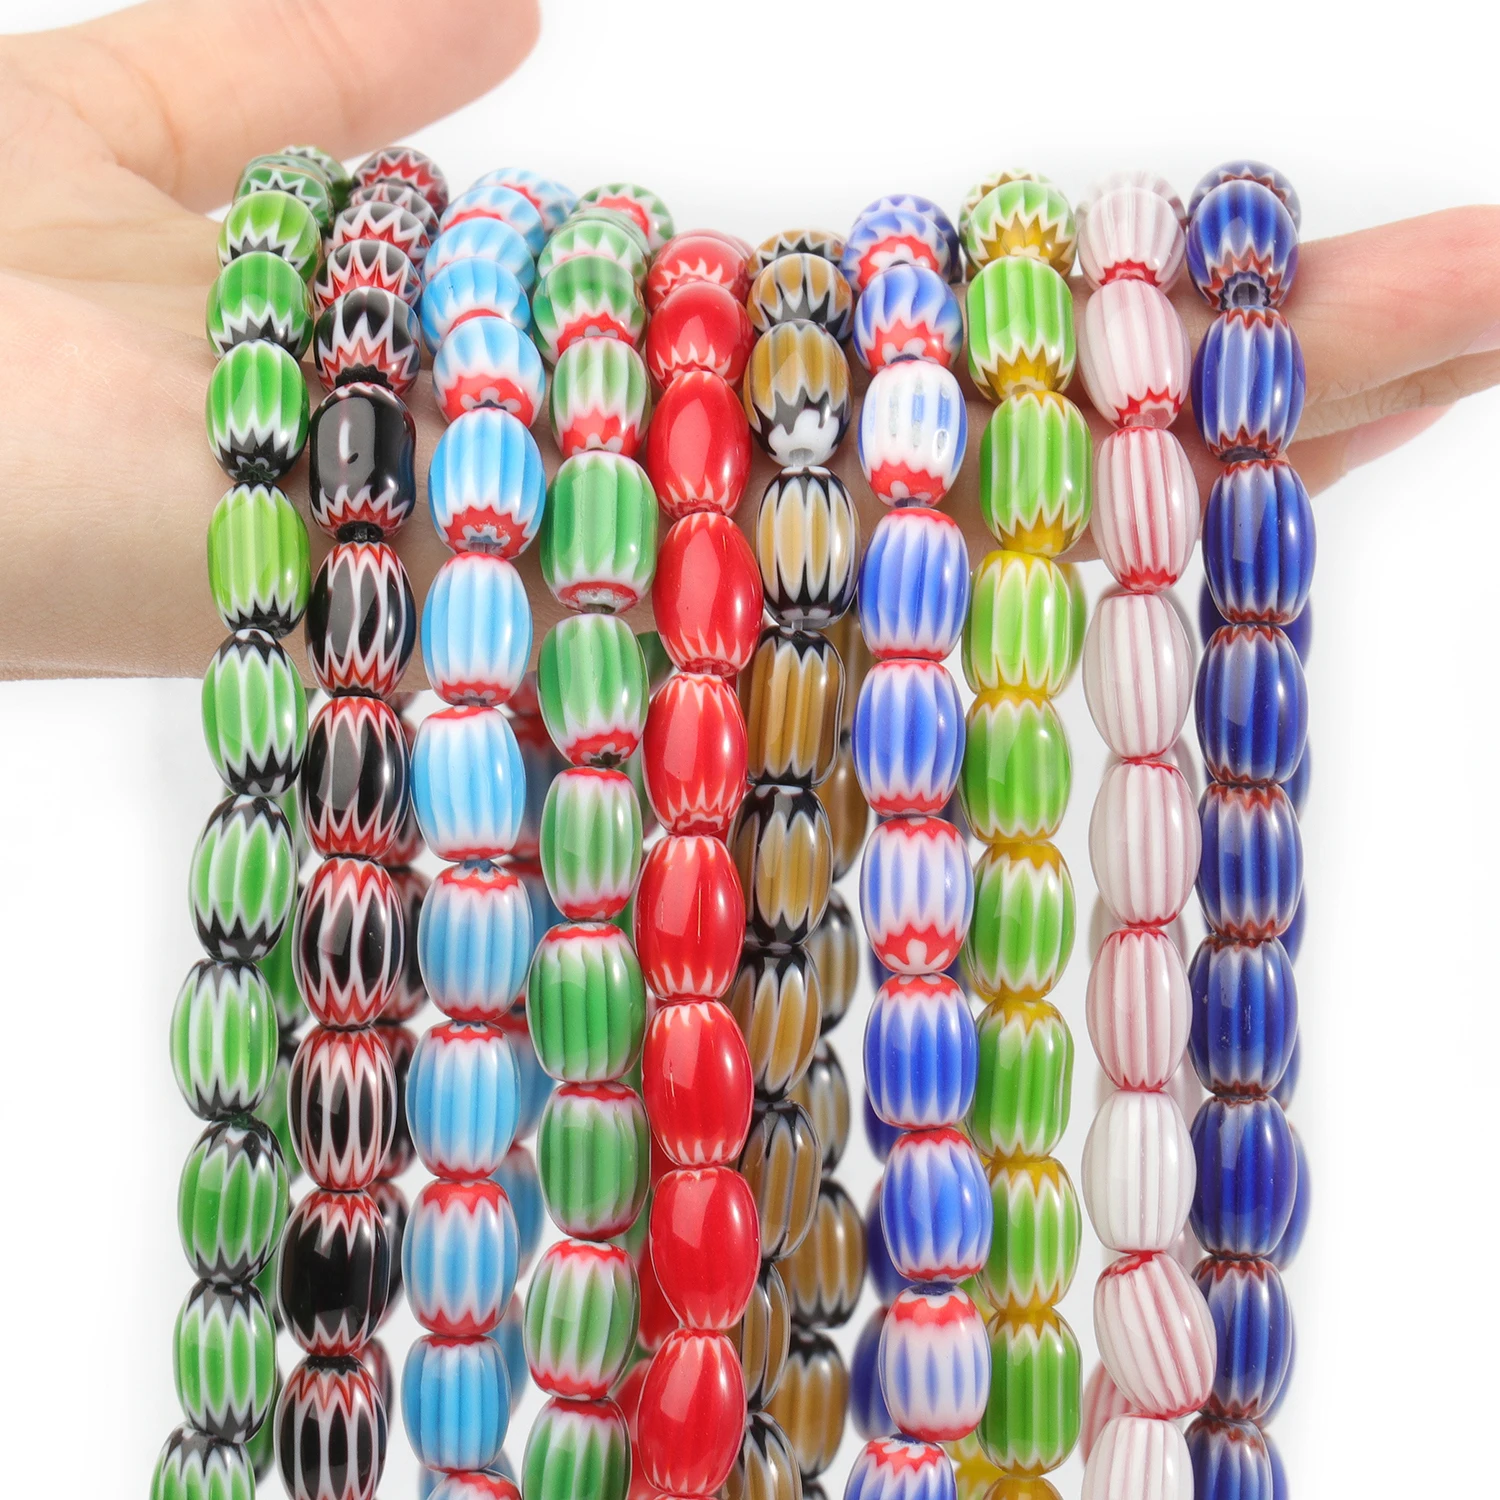 

10color Millefiori Lampwork Murano Beads 12x8mm Oval Shape Bead Diy Loose Beads for Jewelry Making Handmade Bracelet Accessories